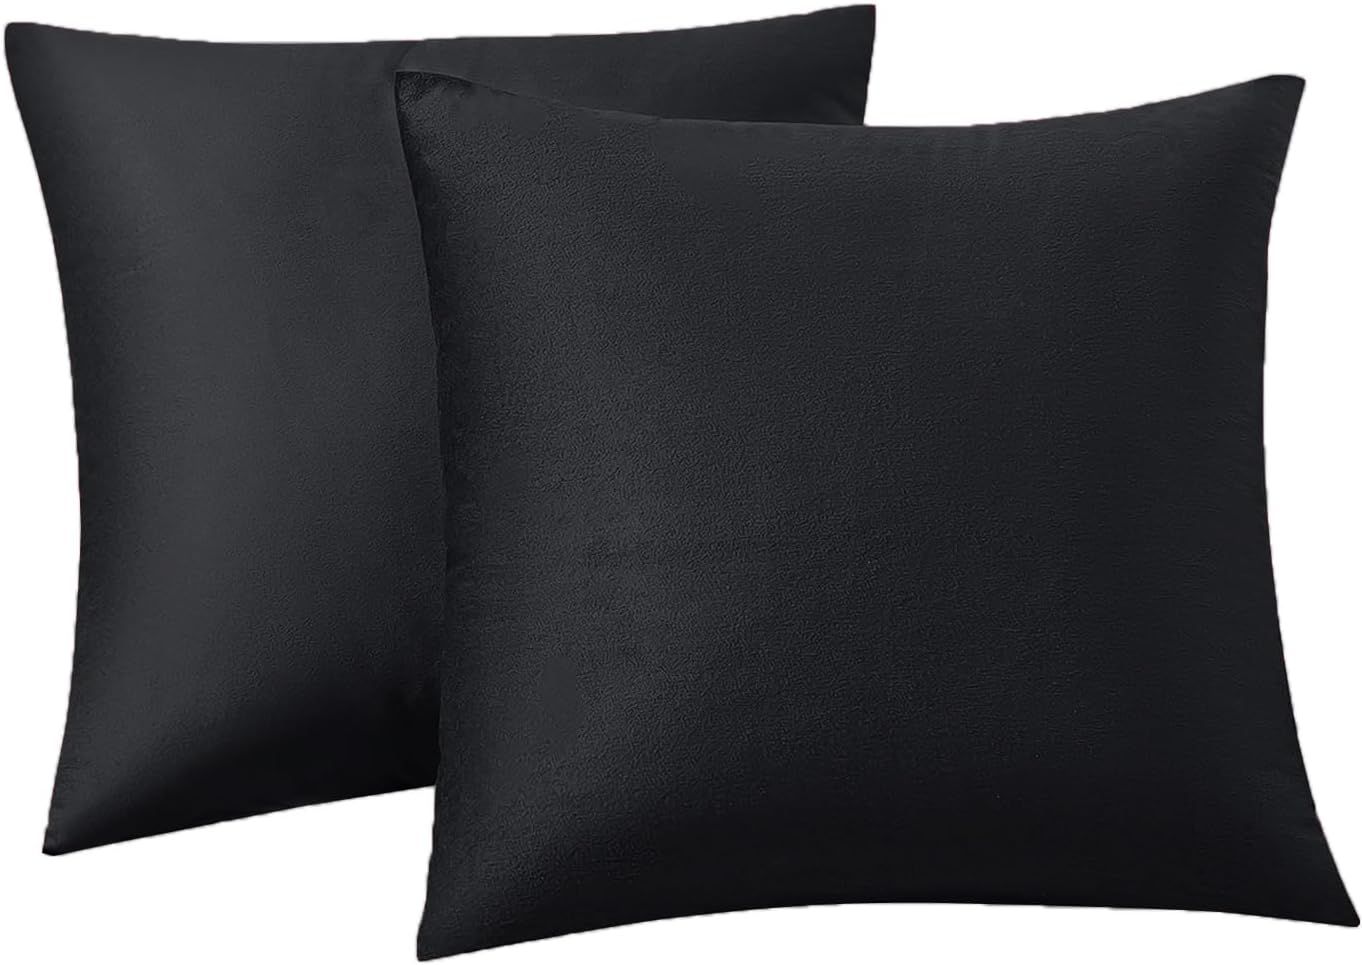 Black Throw Pillows Covers Set of 2 Soft Velvet Decorative Pillow Covers 18x18 Inch for Couch Bed... | Amazon (US)